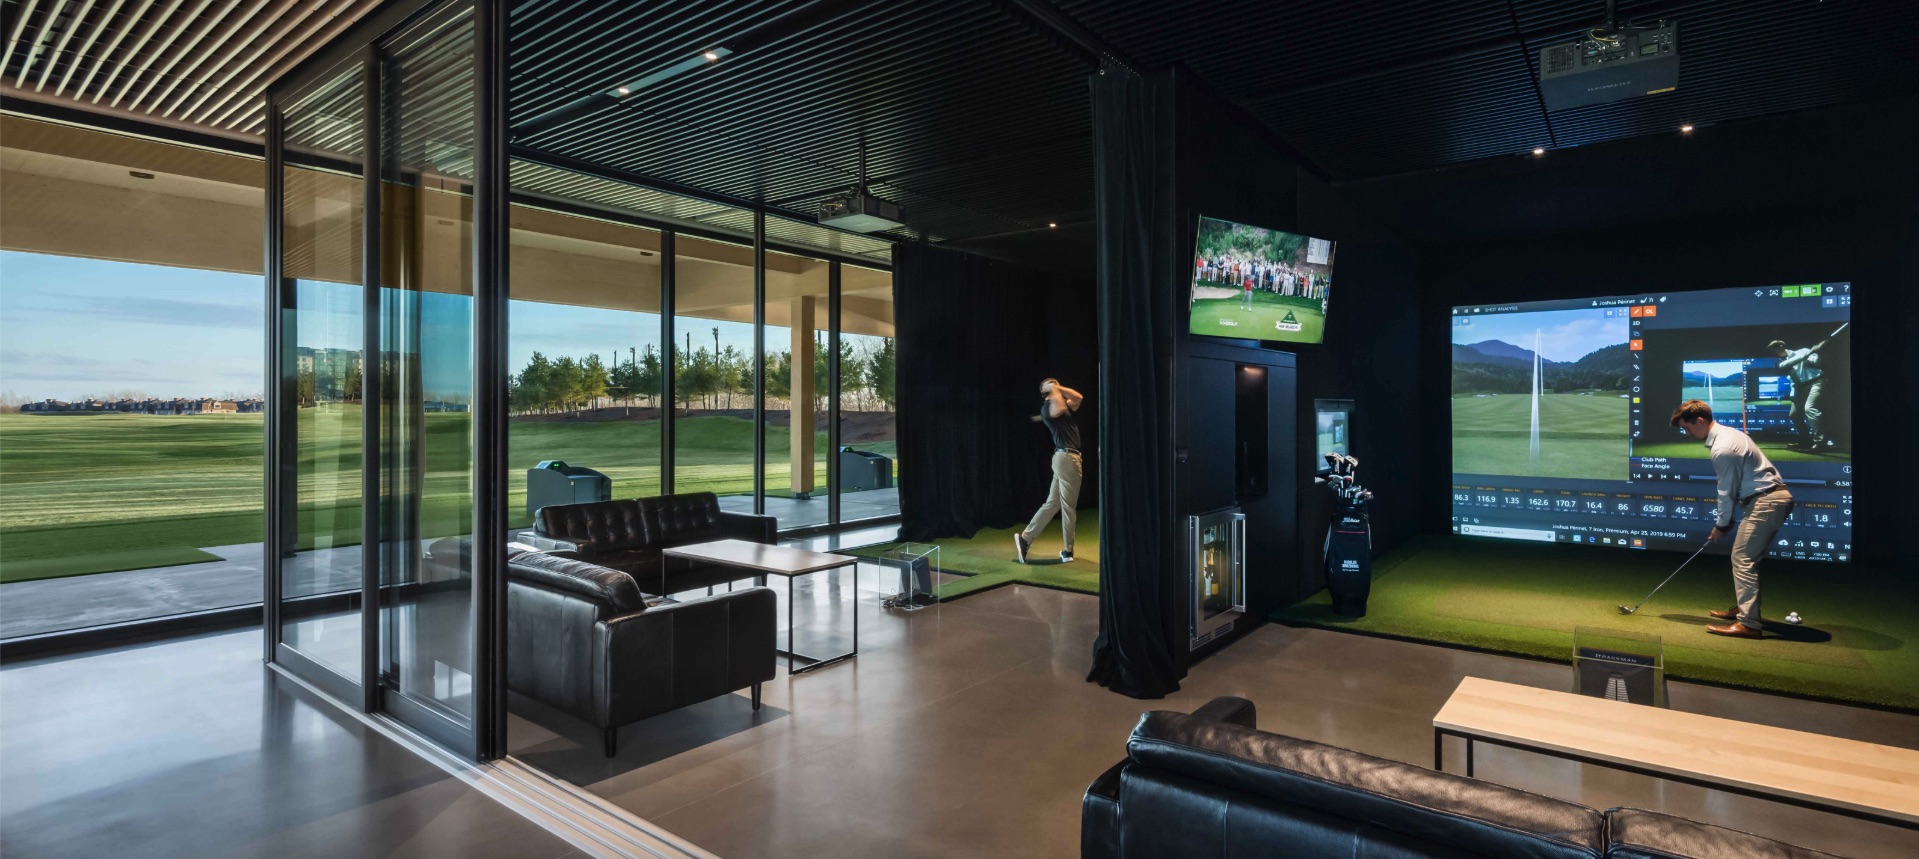 Golf Simulators: How To Play Golf When The Courses Are Closed